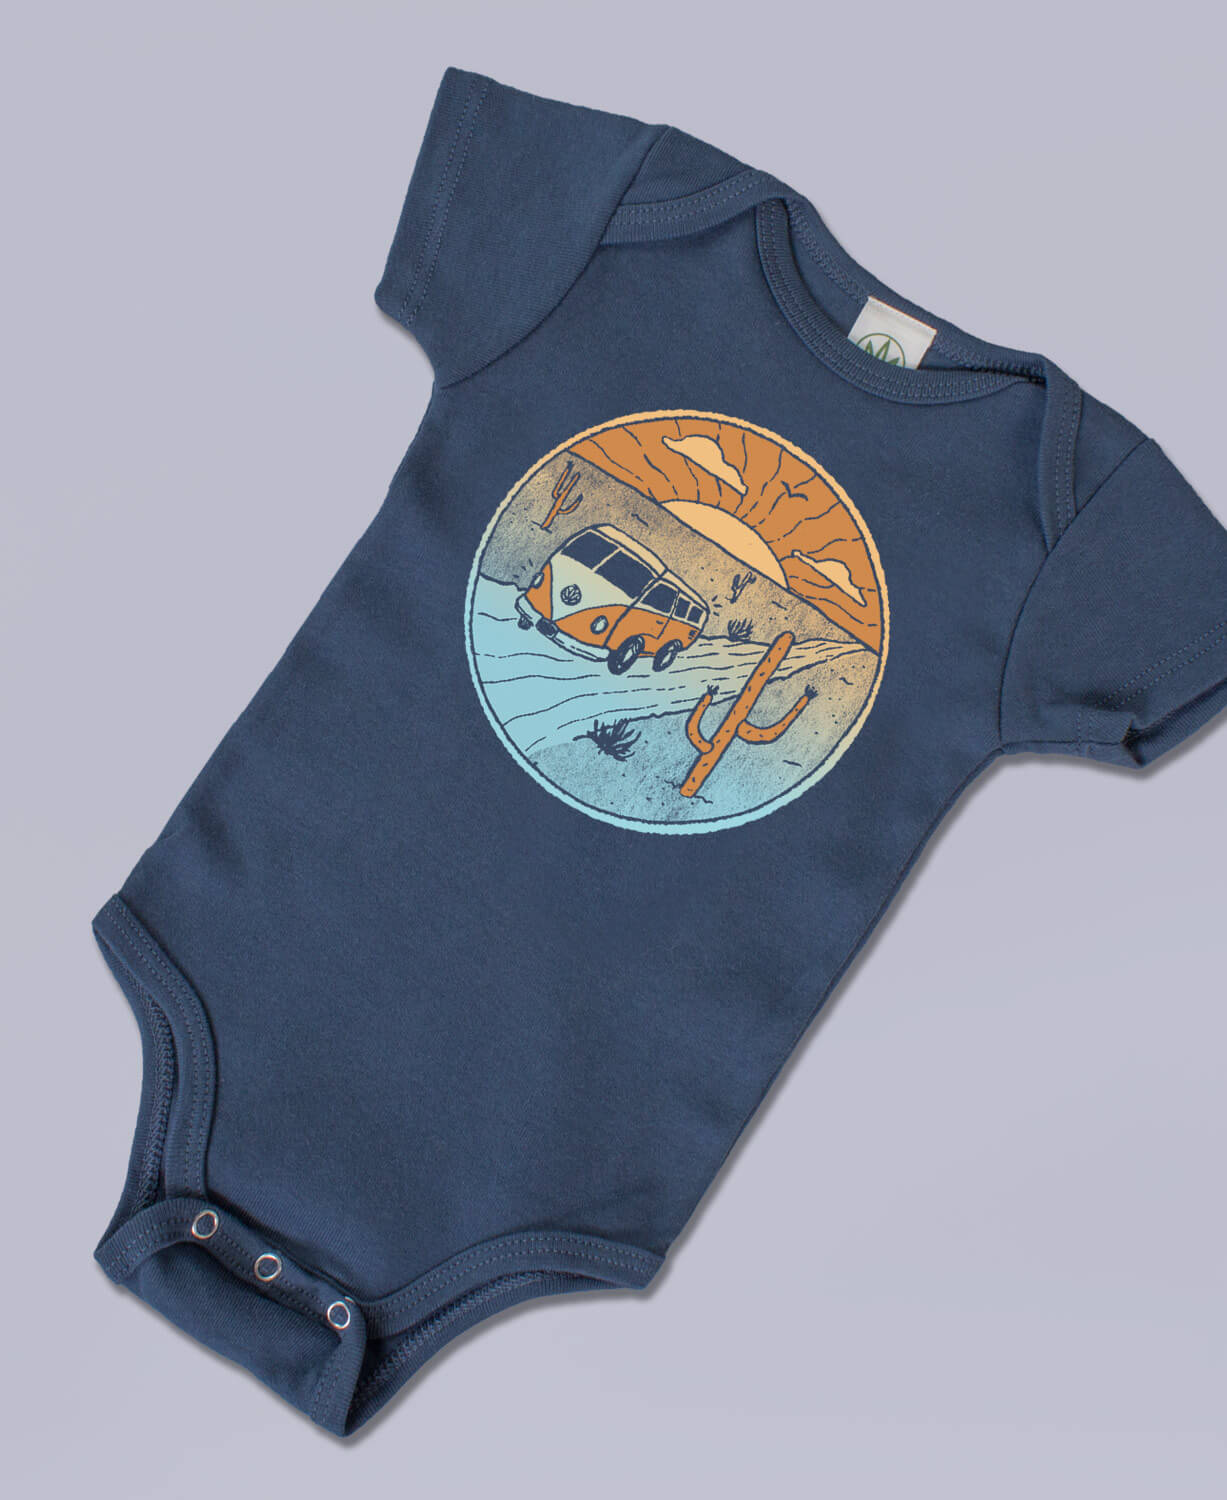 Sleepsuit Baby Camper Baby Grow VW Camper Baby Clothes